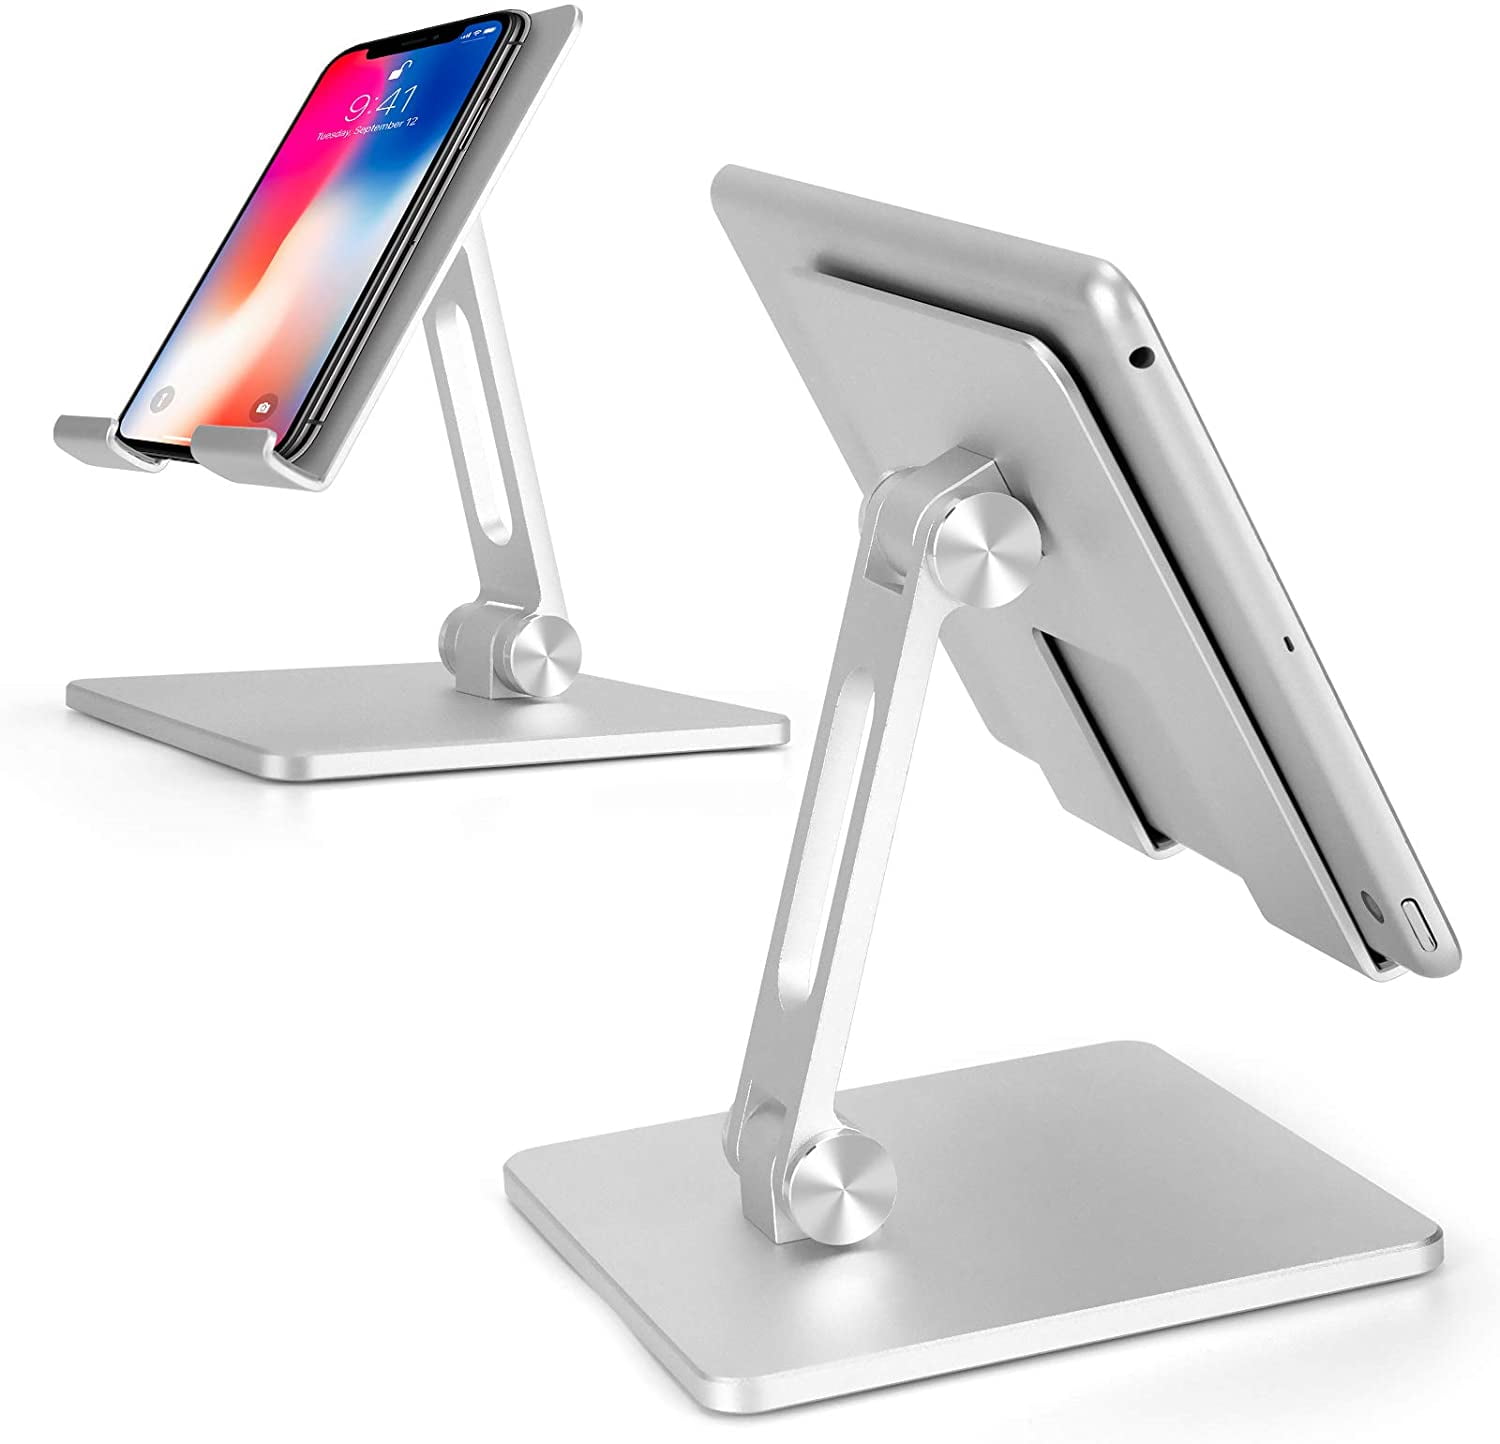 XP168 Tablet Stand Holder For iPad Pro For iPad Air Adjustable iPad  accessories soporte tablet 4-12.9 for Huawei Samsung Xiaomi - AliExpress